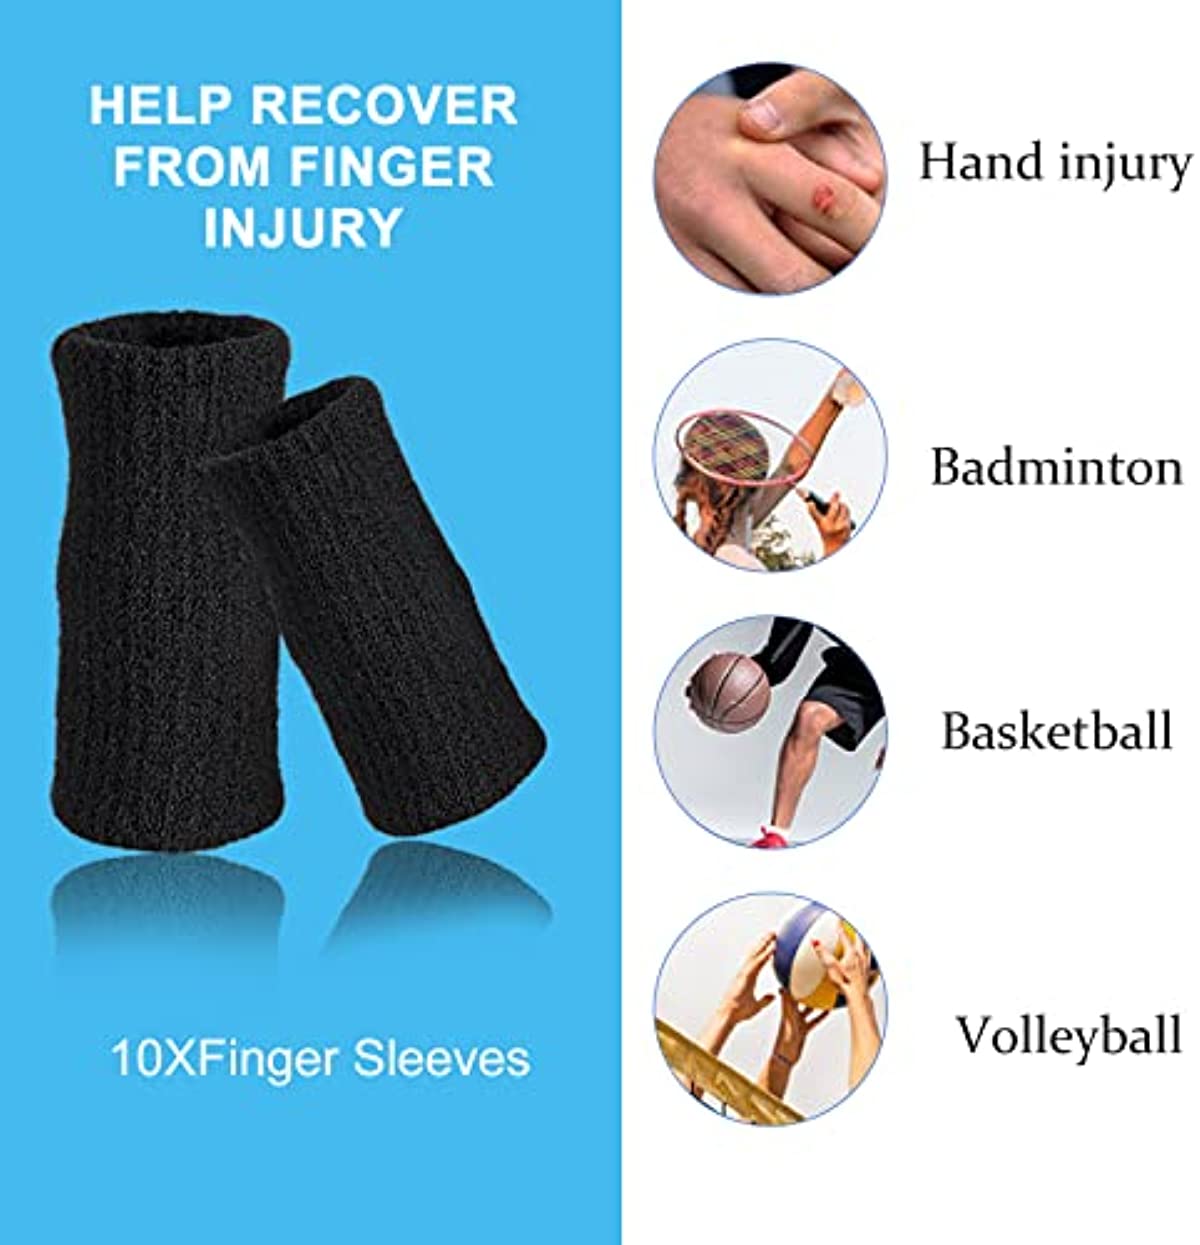 10Pcs Finger Compression Sleeves Support, EDNYZAKRN Finger Sleeve Protectors Cots Thumb Brace for Trigger Finger Arthritis Swelling Basketball Sport, Breathable Elastic Pain Relief